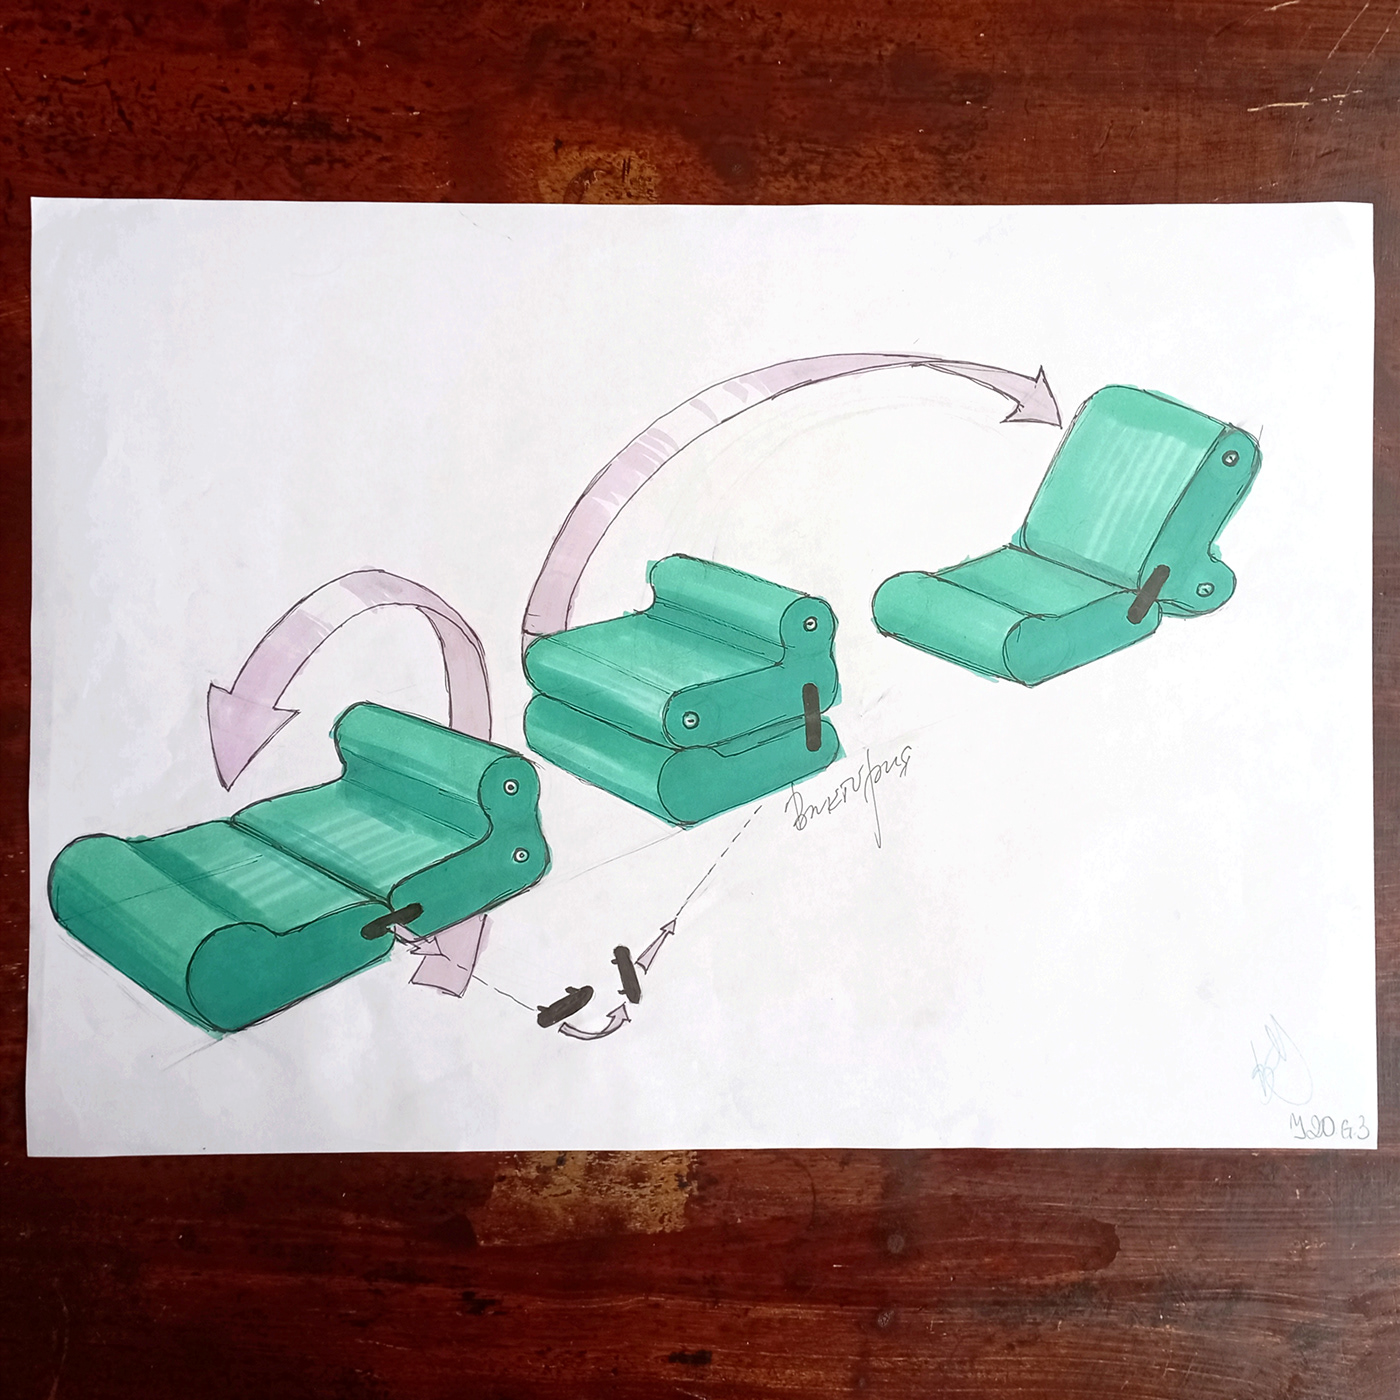 copic markers promarker chair design sketch